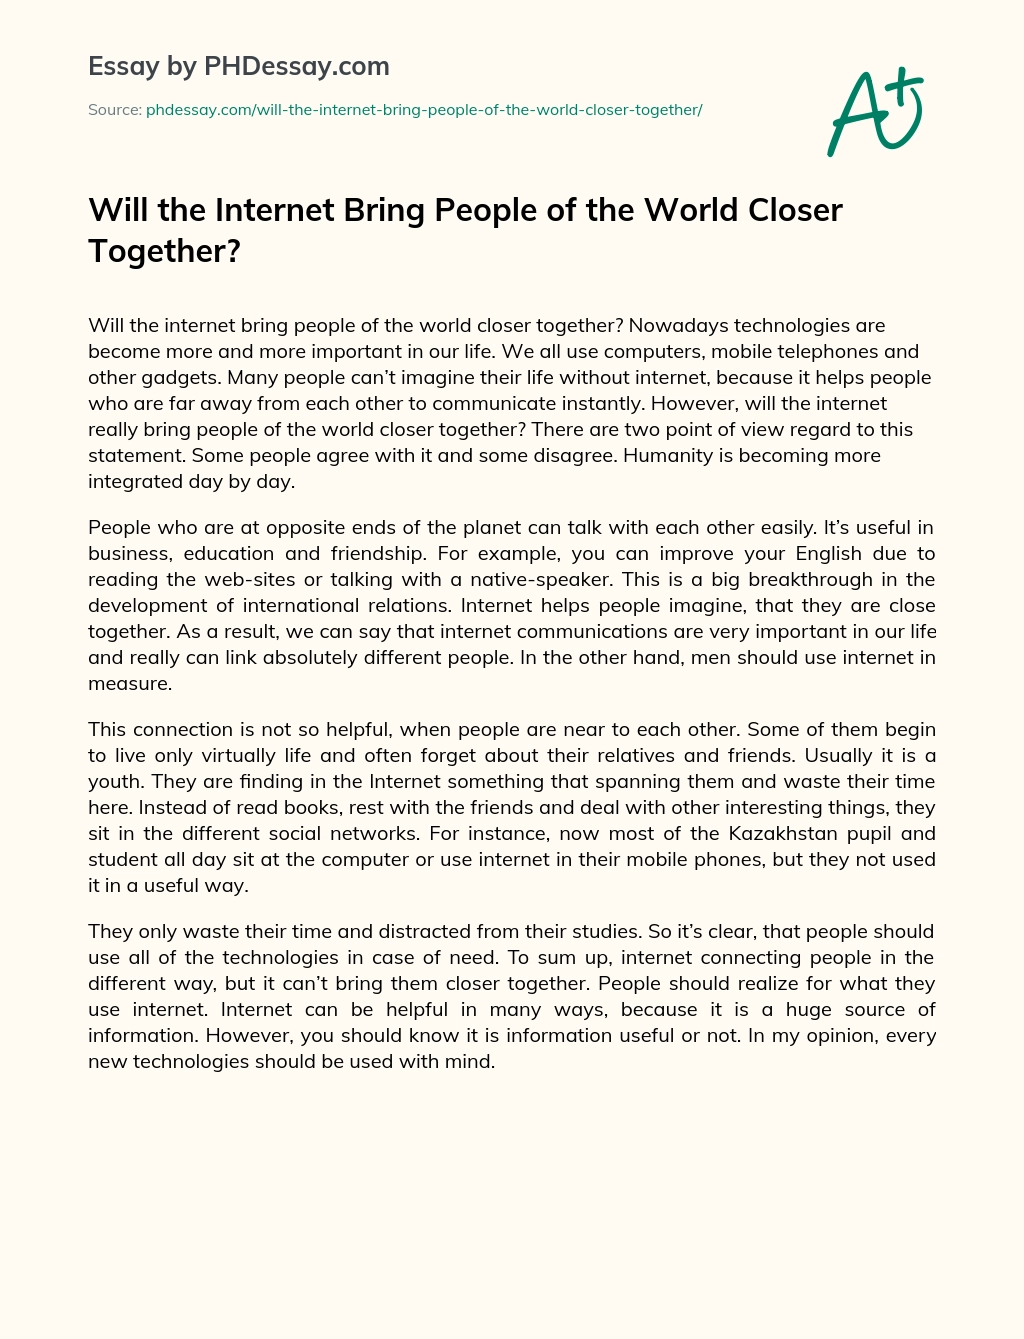 Will the Internet Bring People of the World Closer Together? essay